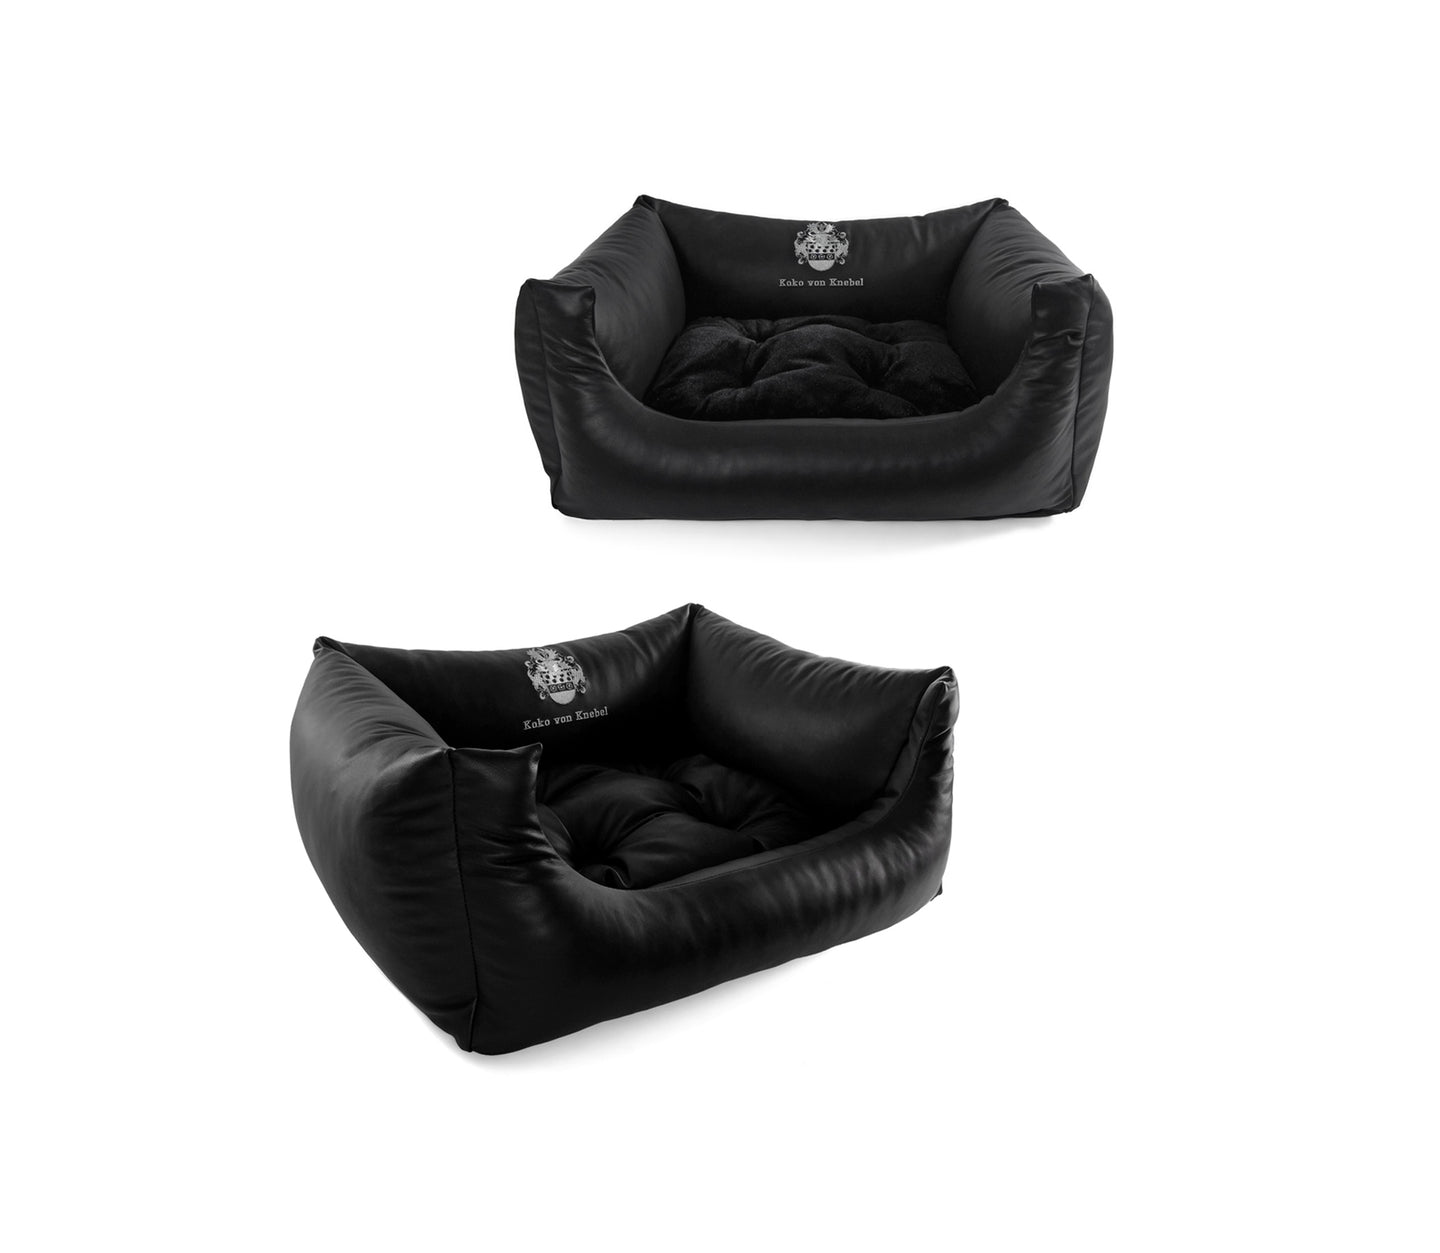 Super Soft Dog Lounge - Genuine Leather - Exclusive Luxury